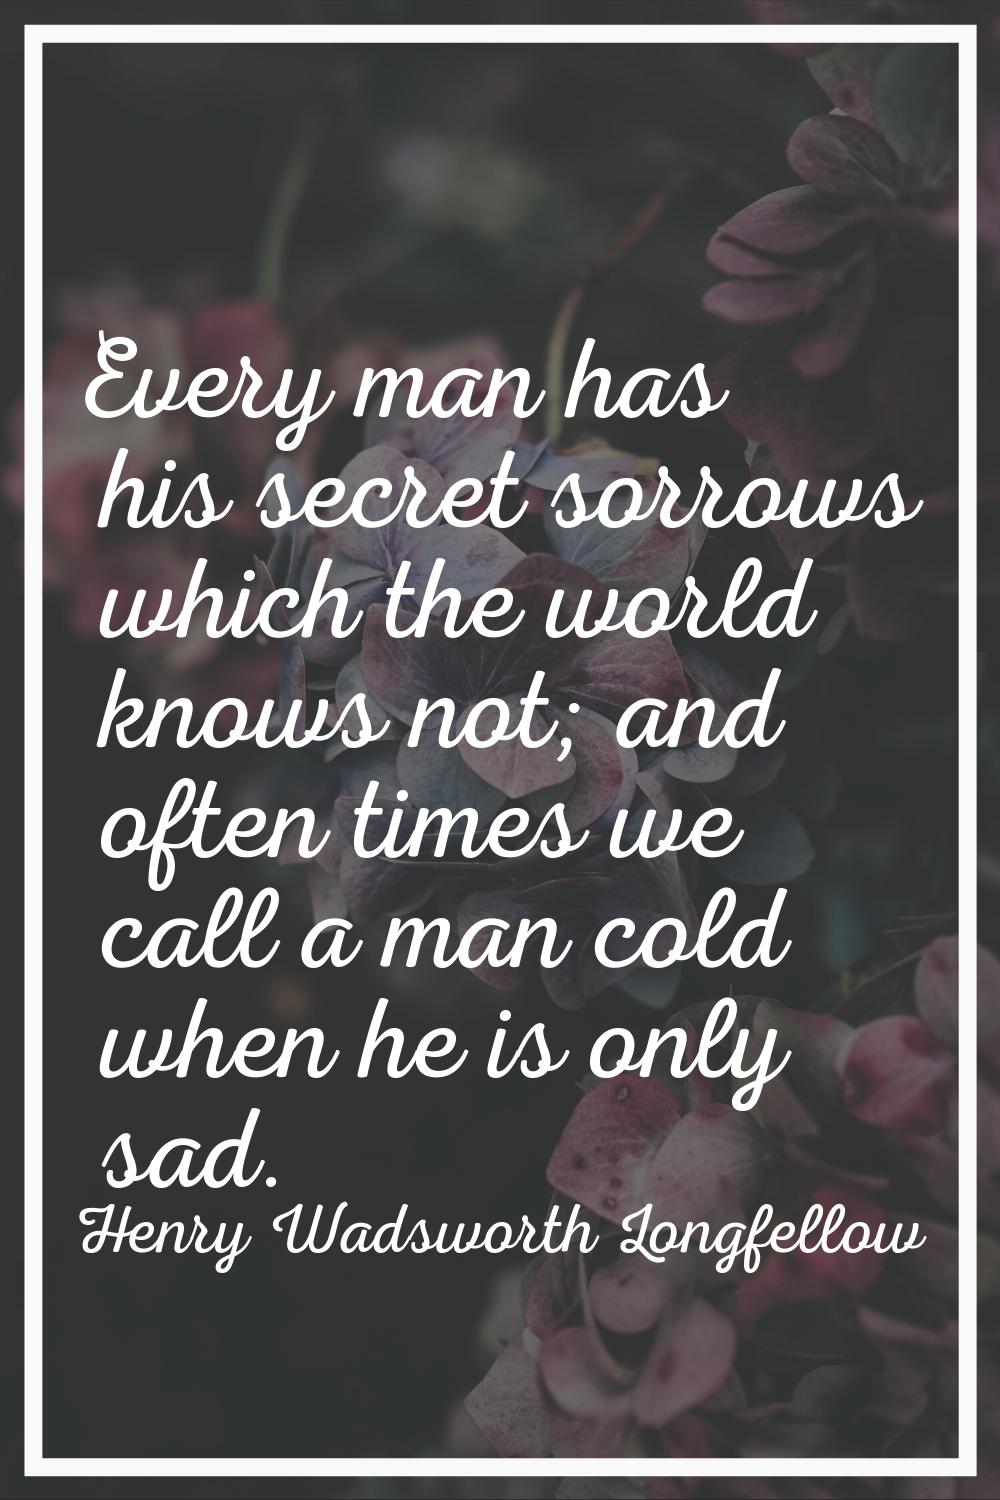 Every man has his secret sorrows which the world knows not; and often times we call a man cold when